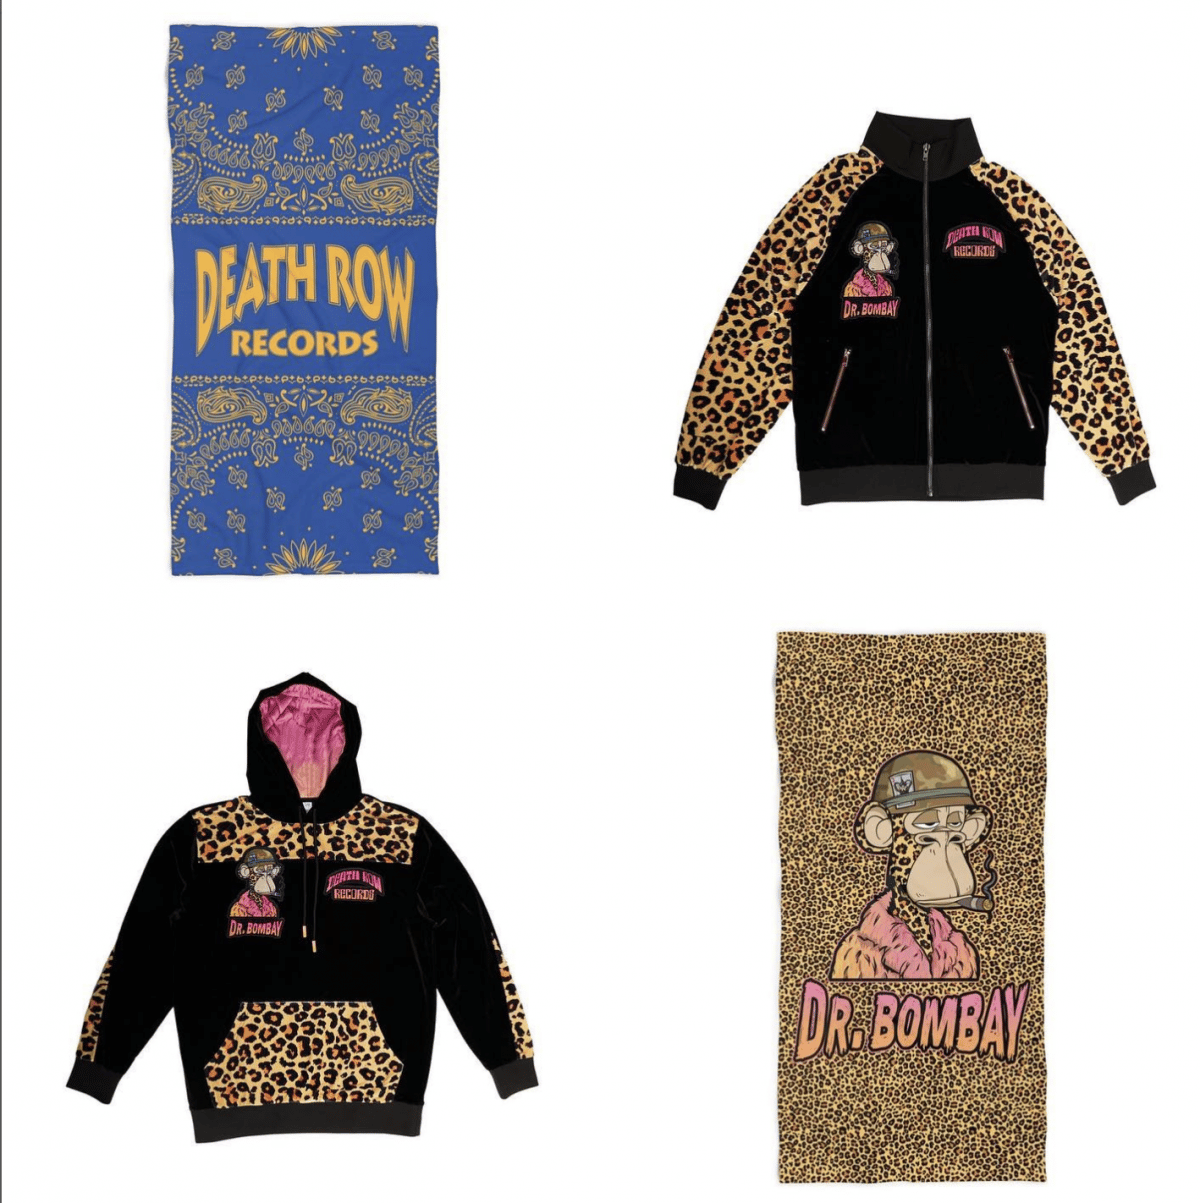 Image showing items of clothing and two beach towels, that are part of the Snoop Dogg merch drop